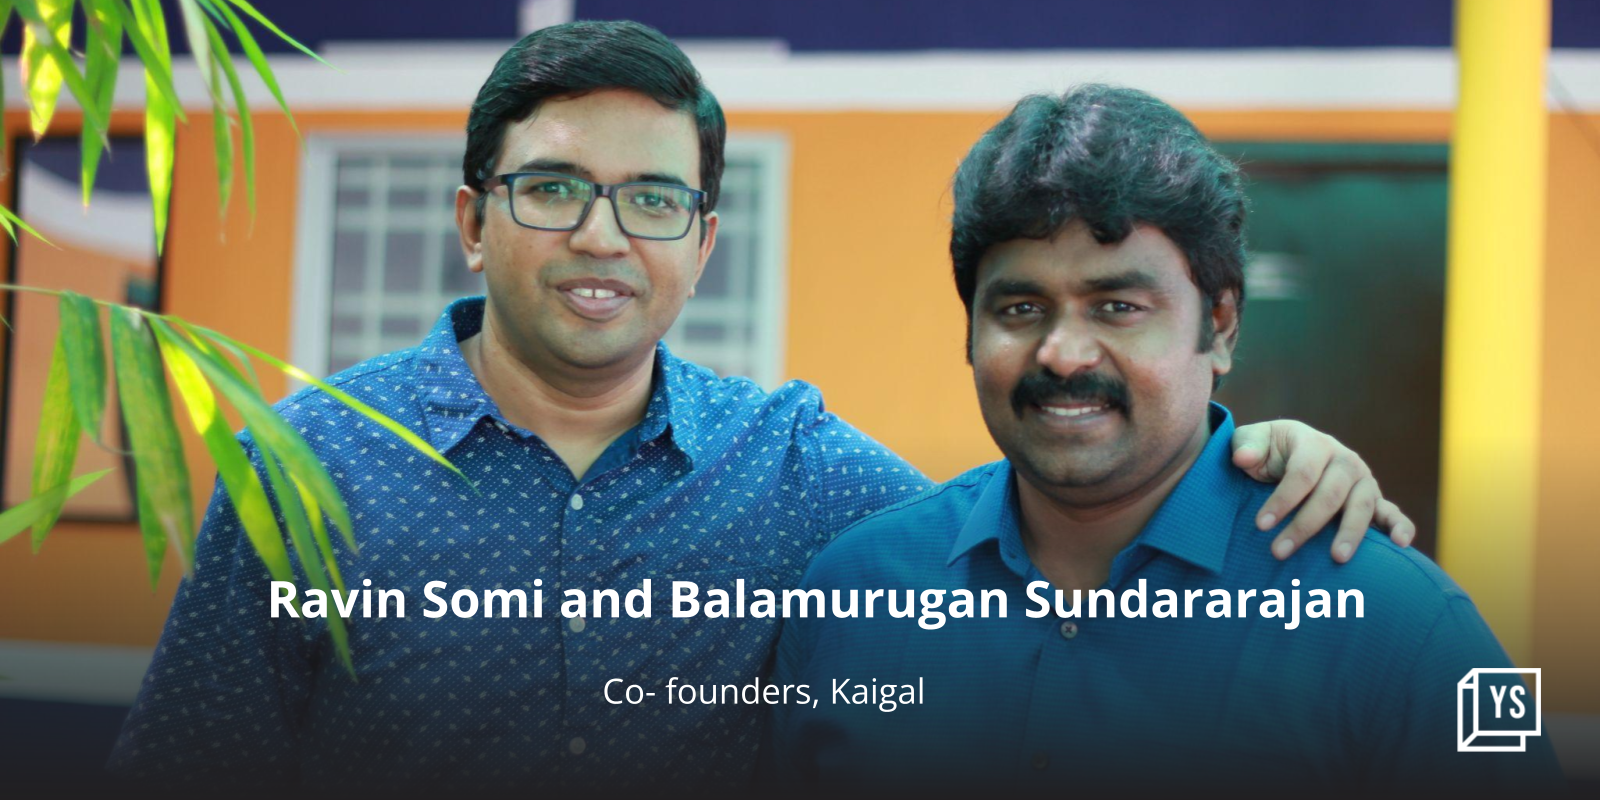 This Namakkal-based startup connects blue-collar workers with businesses